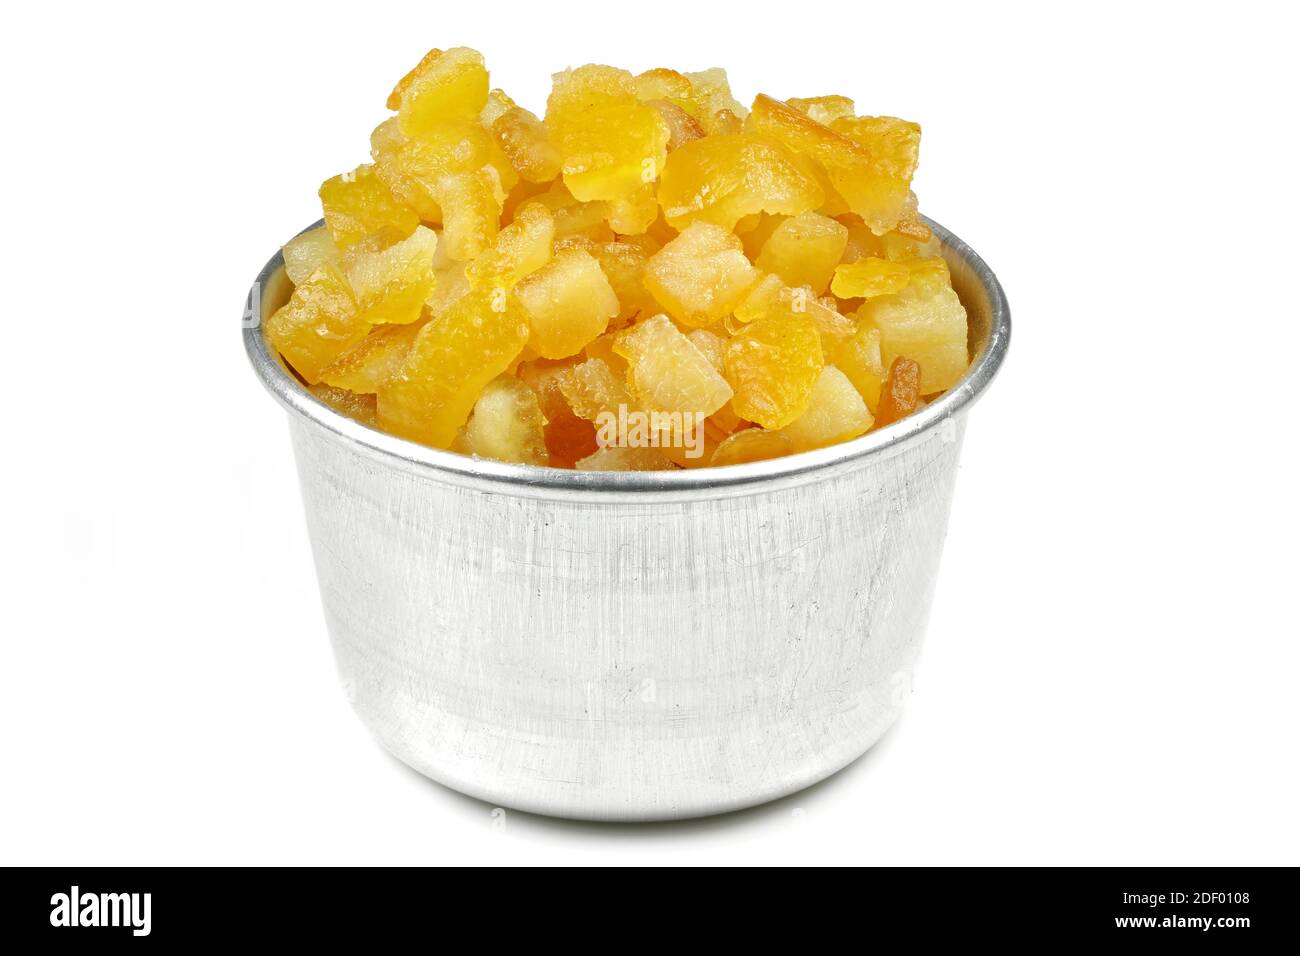 candied orange peel in an aluminium bowl isolated on white background Stock Photo